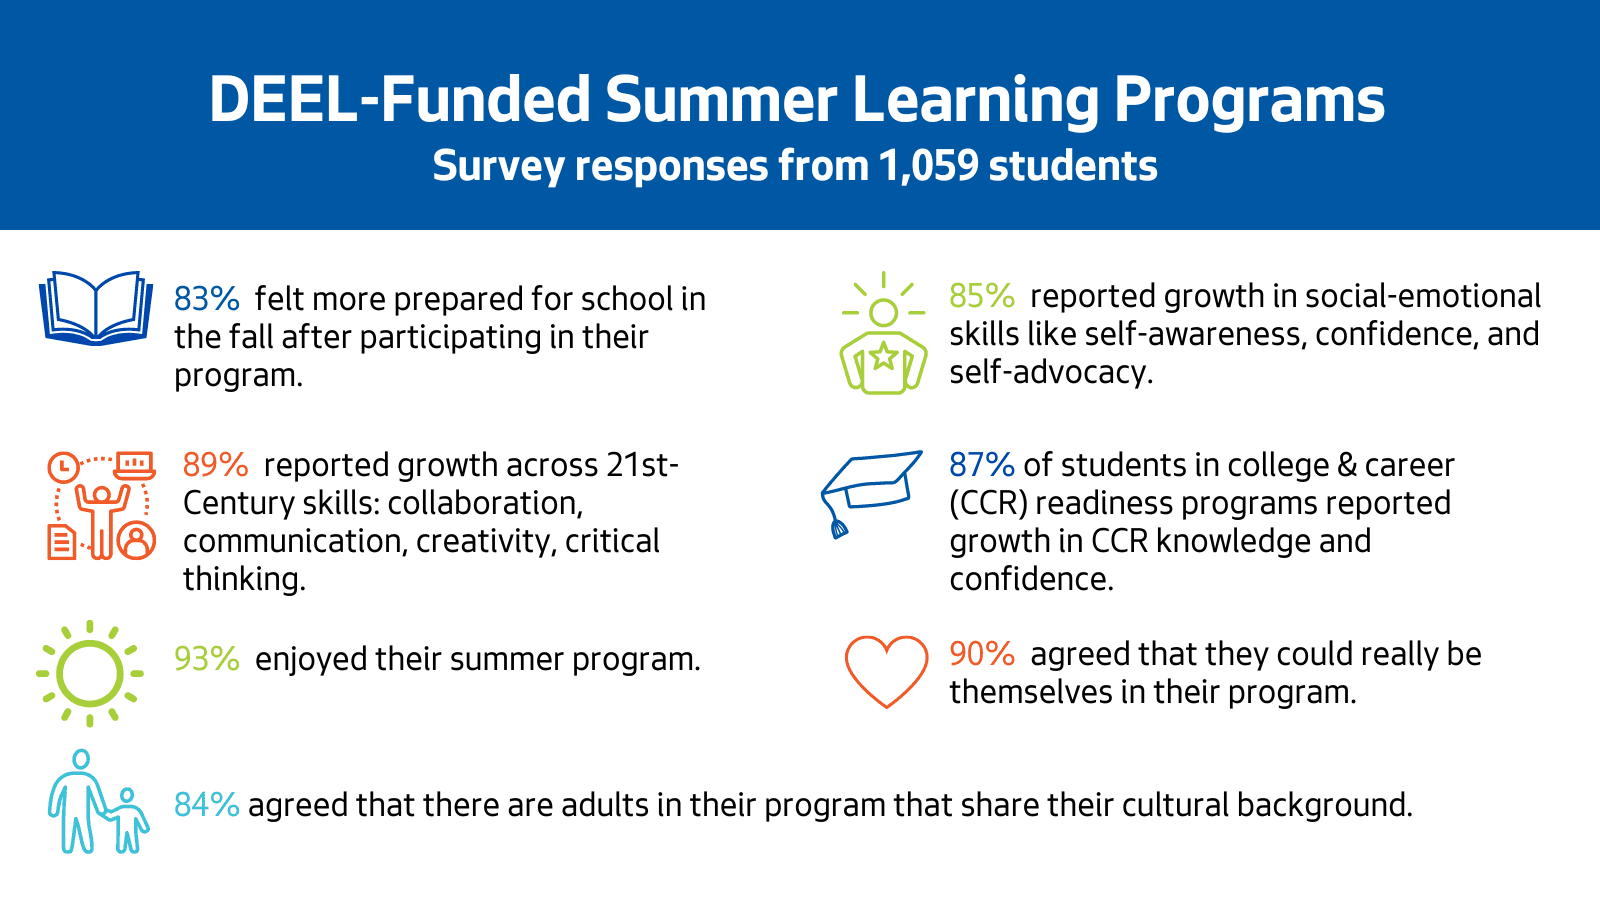 Image conveys student experiences participating in DEEL-funded summer programs. Of 1,059 students: 83% felt more prepared for school in the fall after participating in their program; 89% reported growth across 21st-century skills, communication, creativity, and critical thinking; 93% enjoyed their summer program; 84% agreed there are adults in the program that share their cultural background; 85% reported growth in social-emotional skills like self-awareness, confidenc, and self-advocacy; 87% of students in college & career (CCR) programs reported growth in CCR knowledge and confidence; 90% agreed they could really be themselves in their program. 